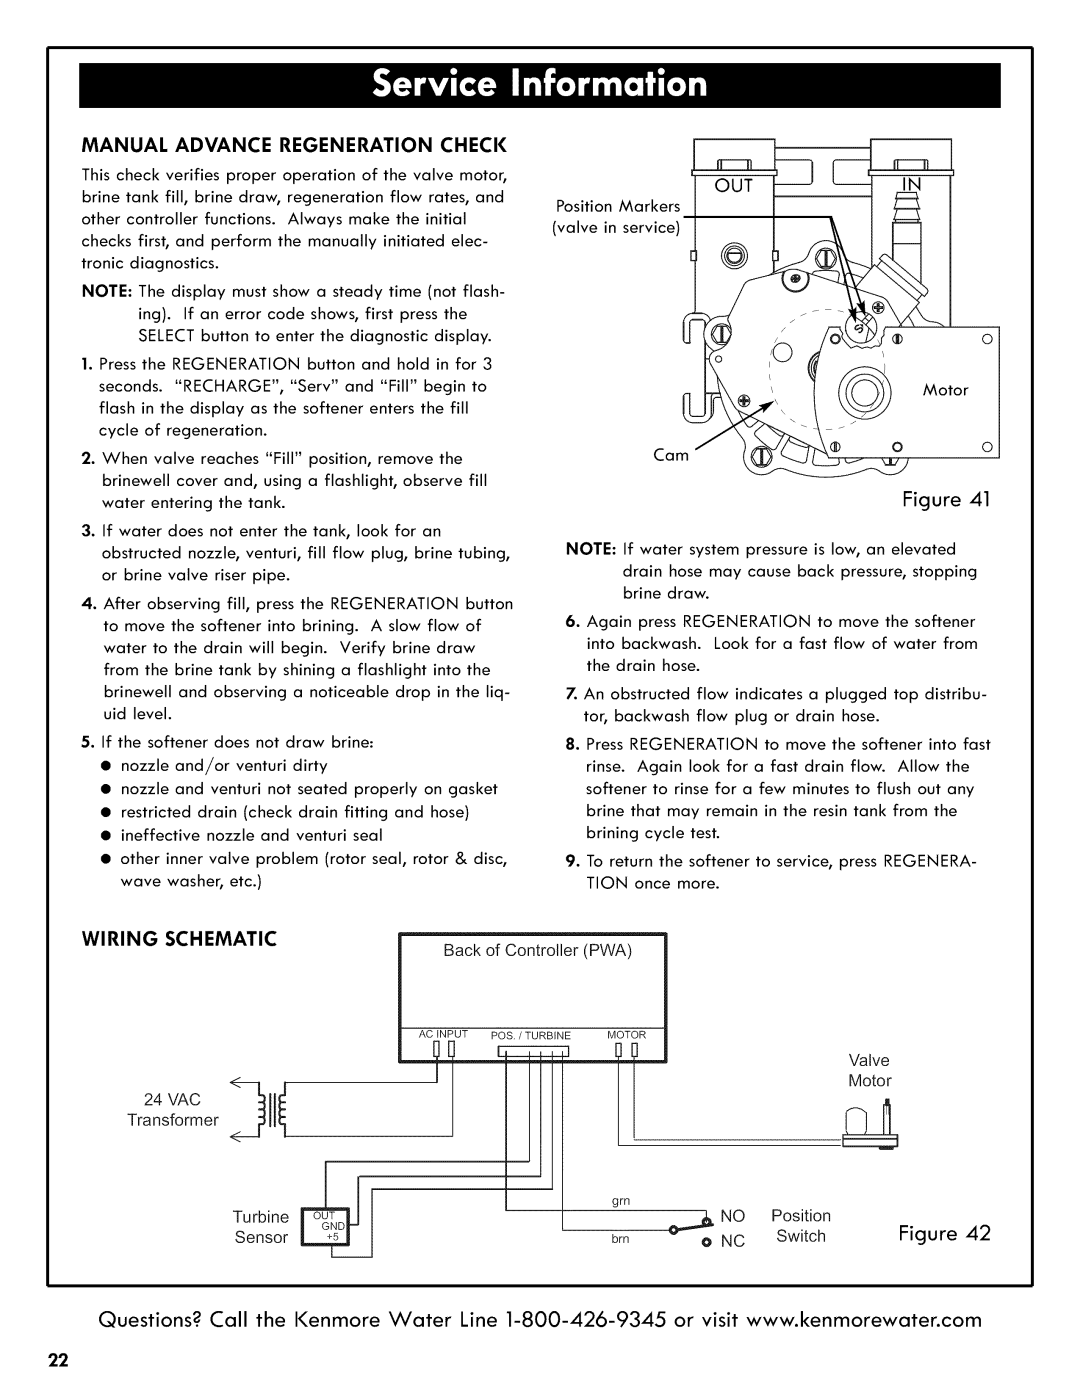 Kenmore 625.3835 manual Manual Advance Regeneration Check, Position Markers valve in service, Wiring Schematic 